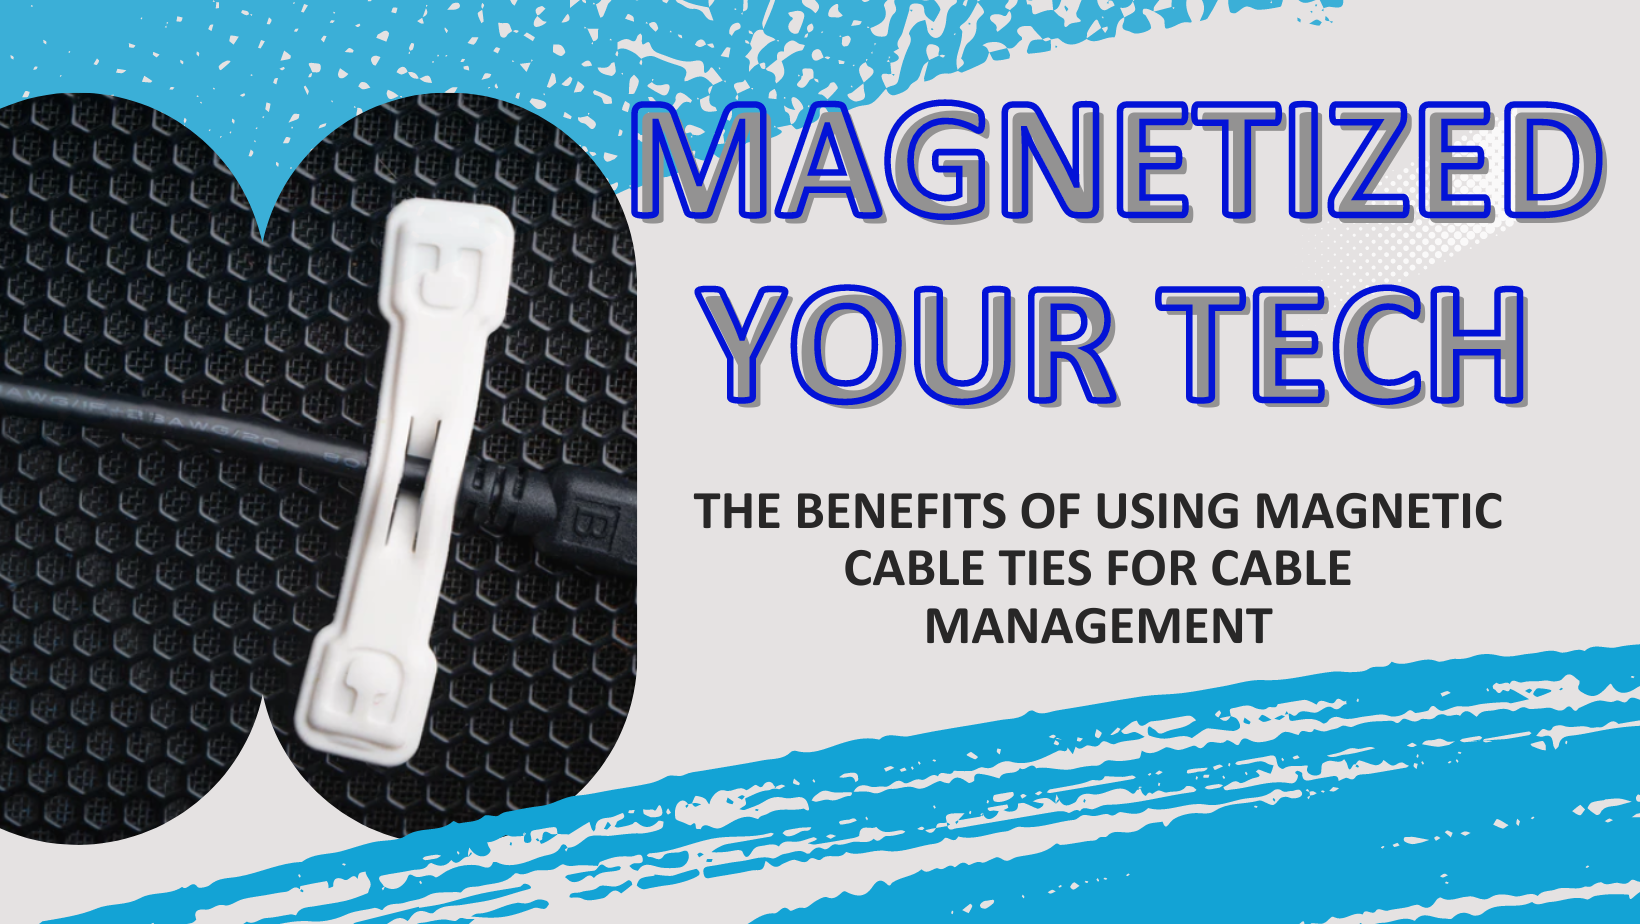 Magnetize Your Tech: The Benefits of Using Magnetic Cable Ties for Cable Management